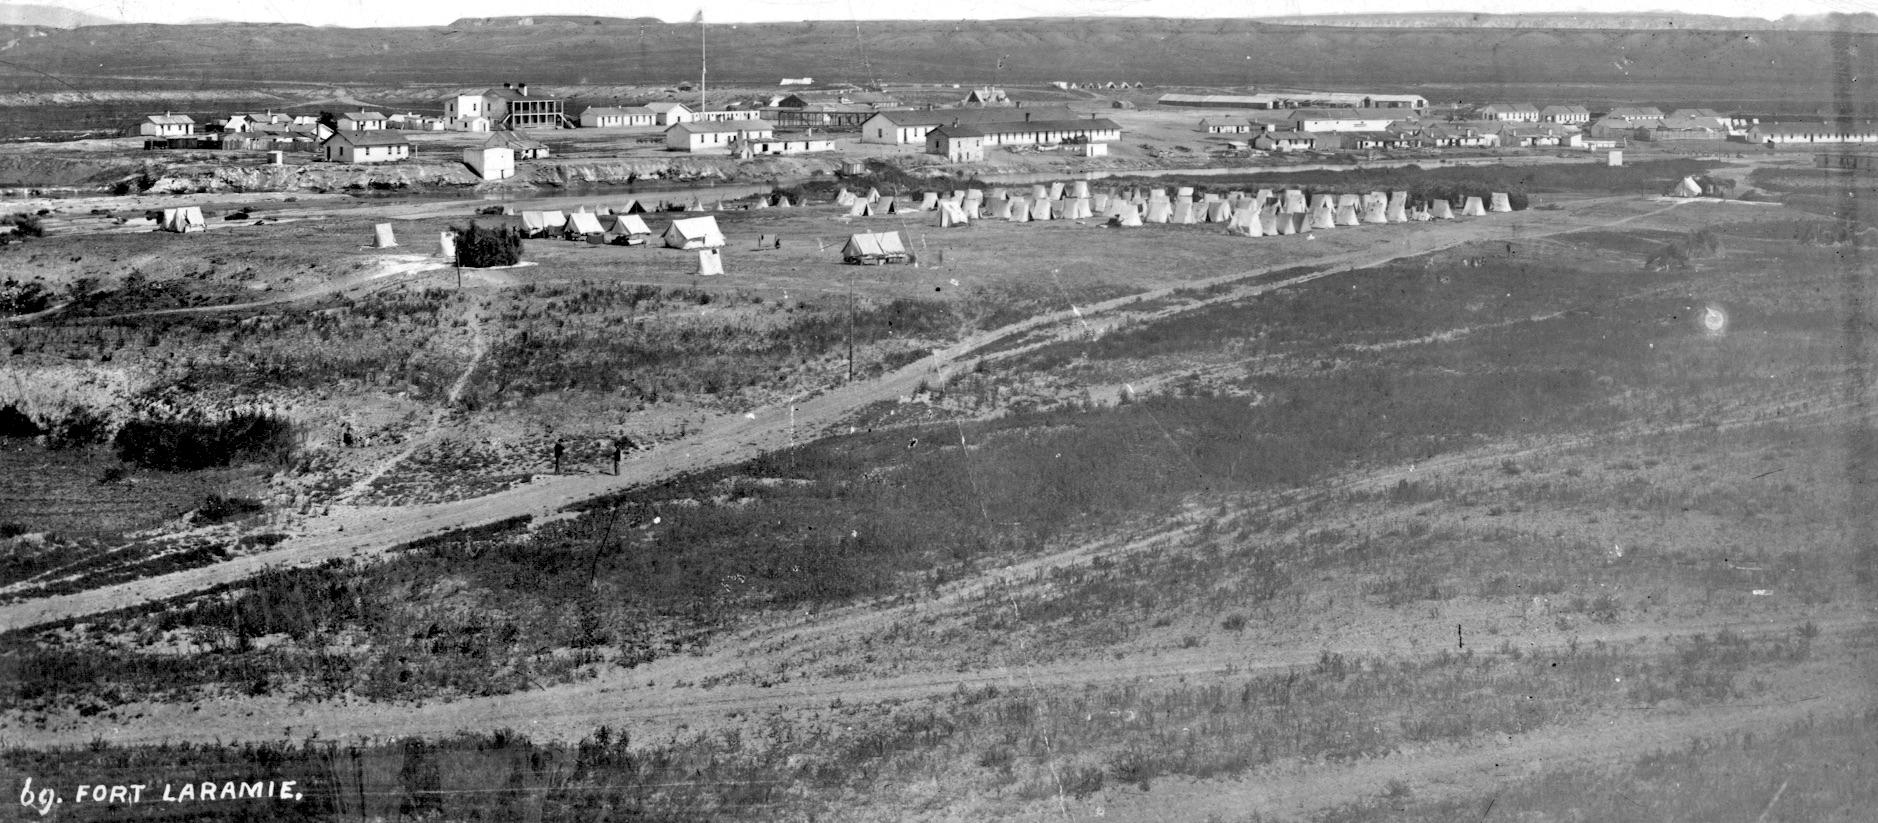 Fort Laramie was a sprawling post in 1870/NPS Archives